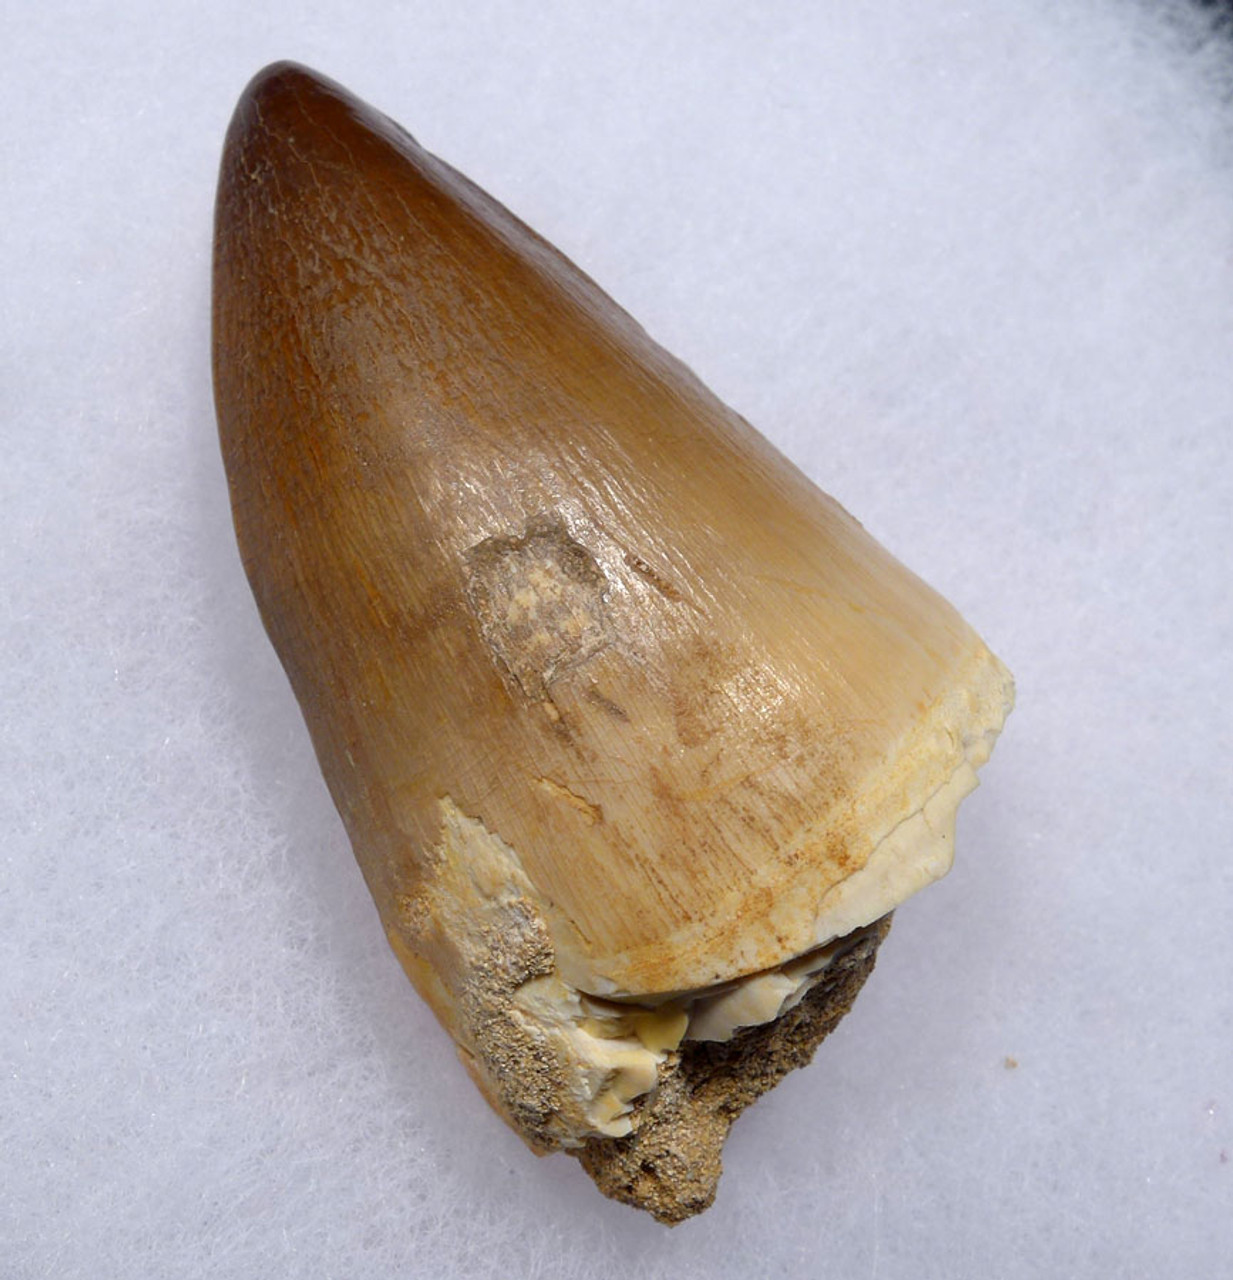 IMPRESSIVE LARGE FOSSIL TOOTH FROM A HUGE MOSASAUR MARINE REPTILE *DT1-132